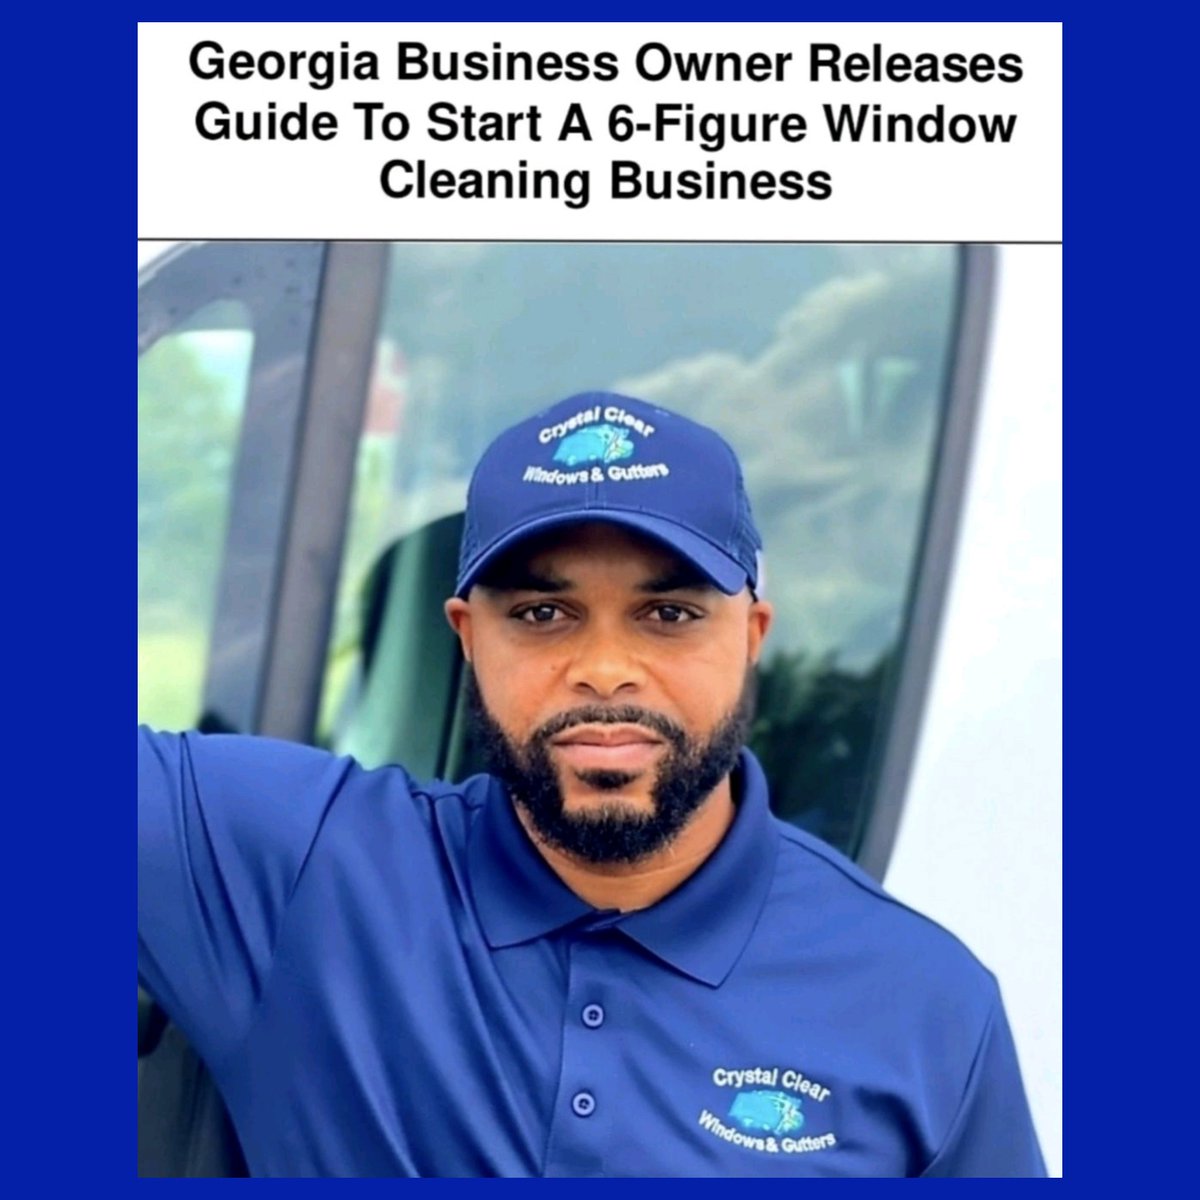 Grab your course on How To Start a Six-Figure Window Cleaning Business today! 

#africanamerican #windowcleaning #blackpride #blackunity #blackbusiness